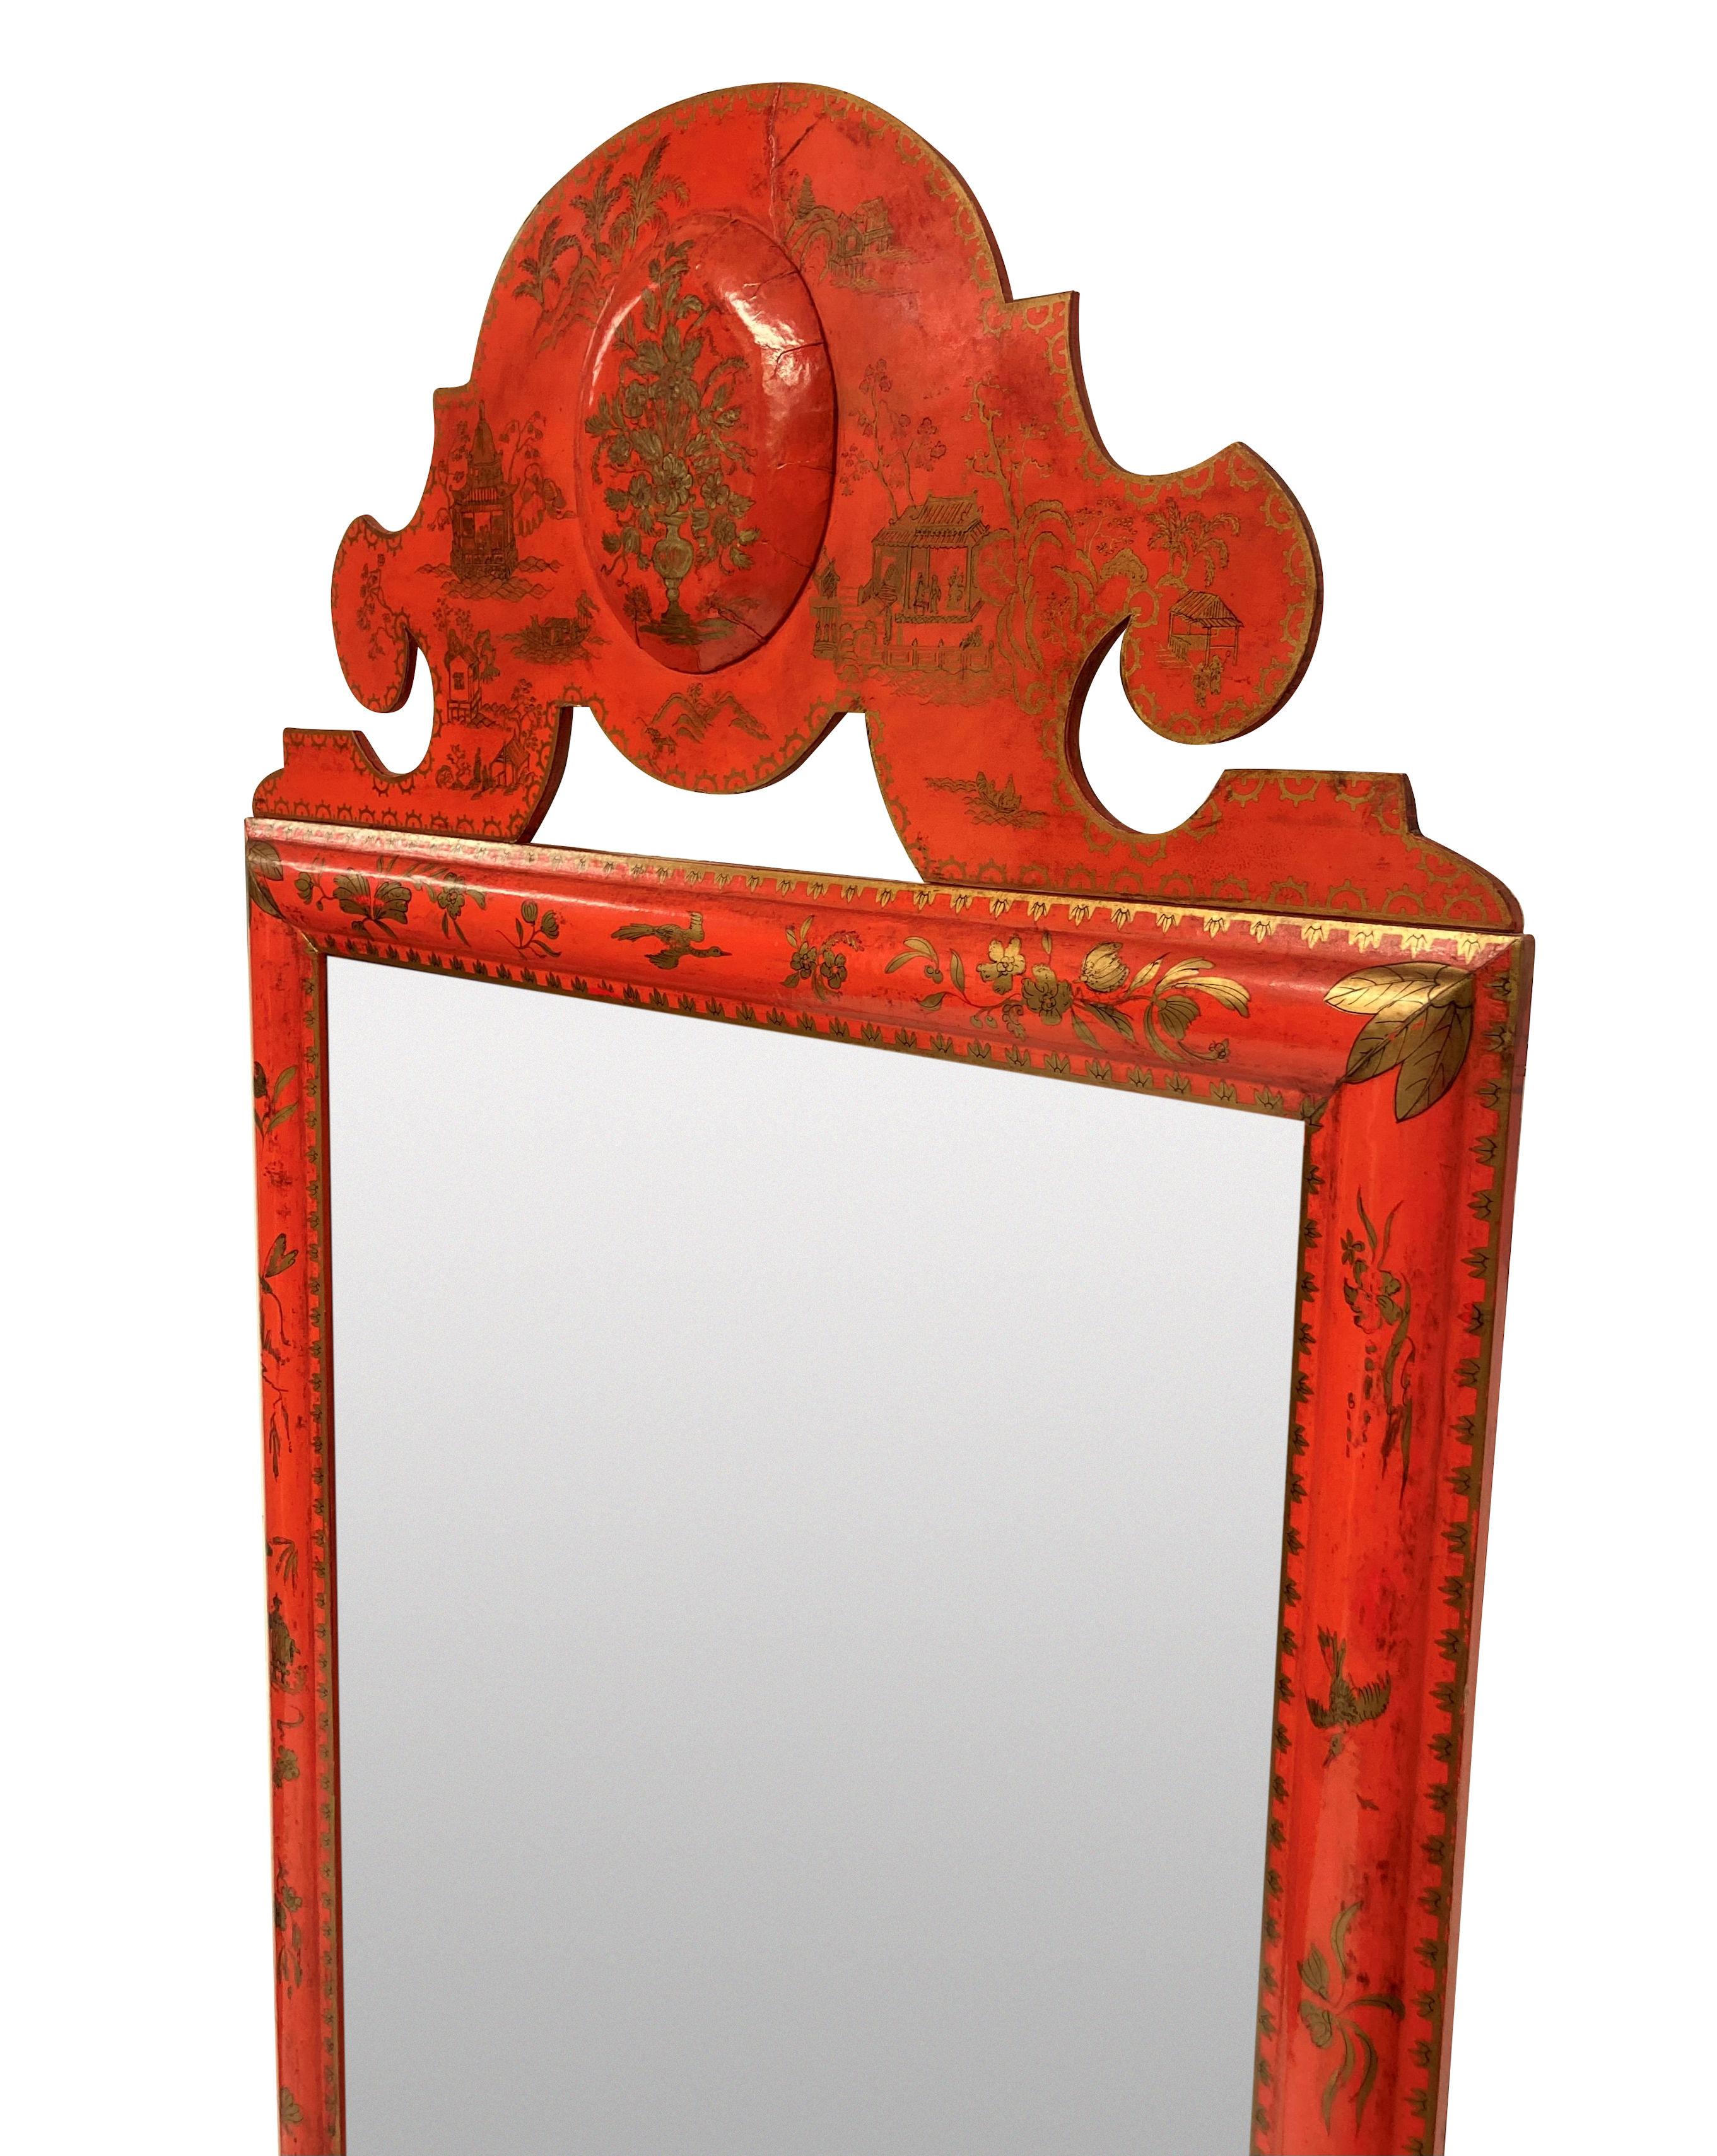 An English scarlet japanned William & Mary style lacquered mirror, with a faux mercury glass plate and new backing paper.